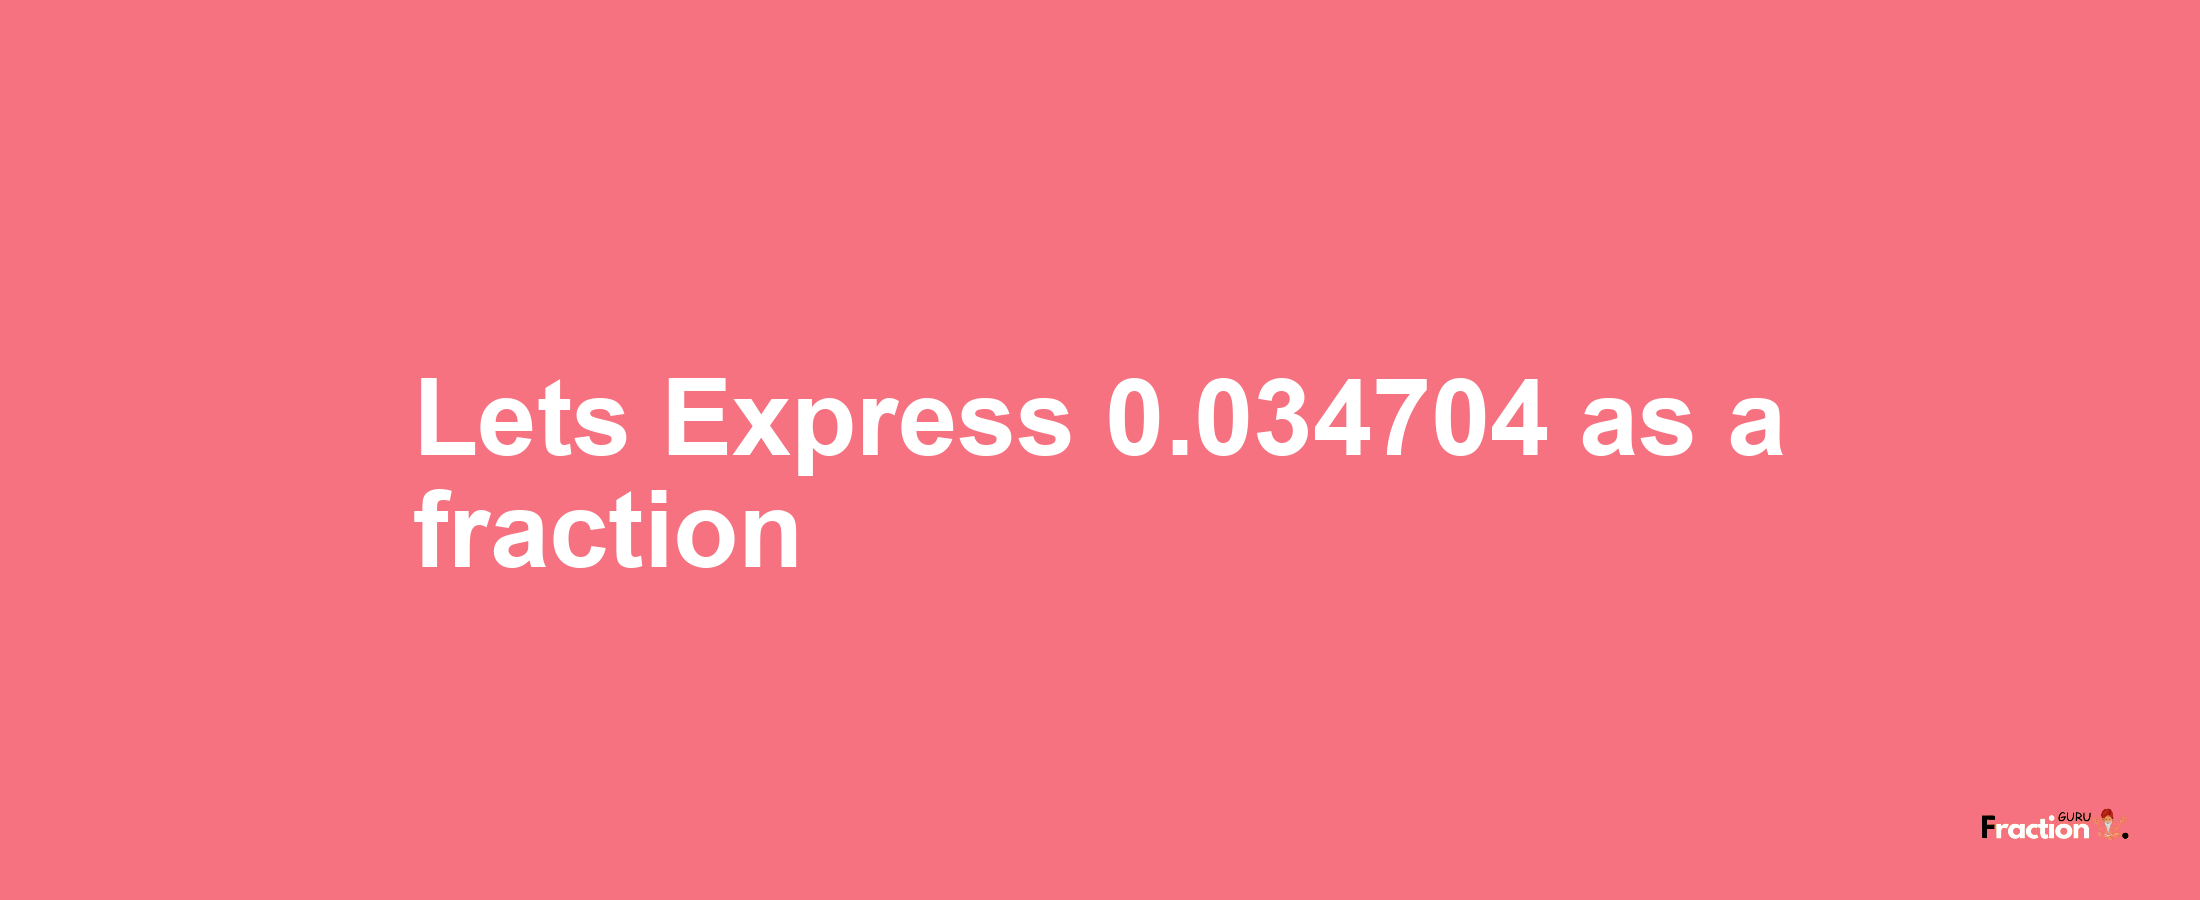 Lets Express 0.034704 as afraction